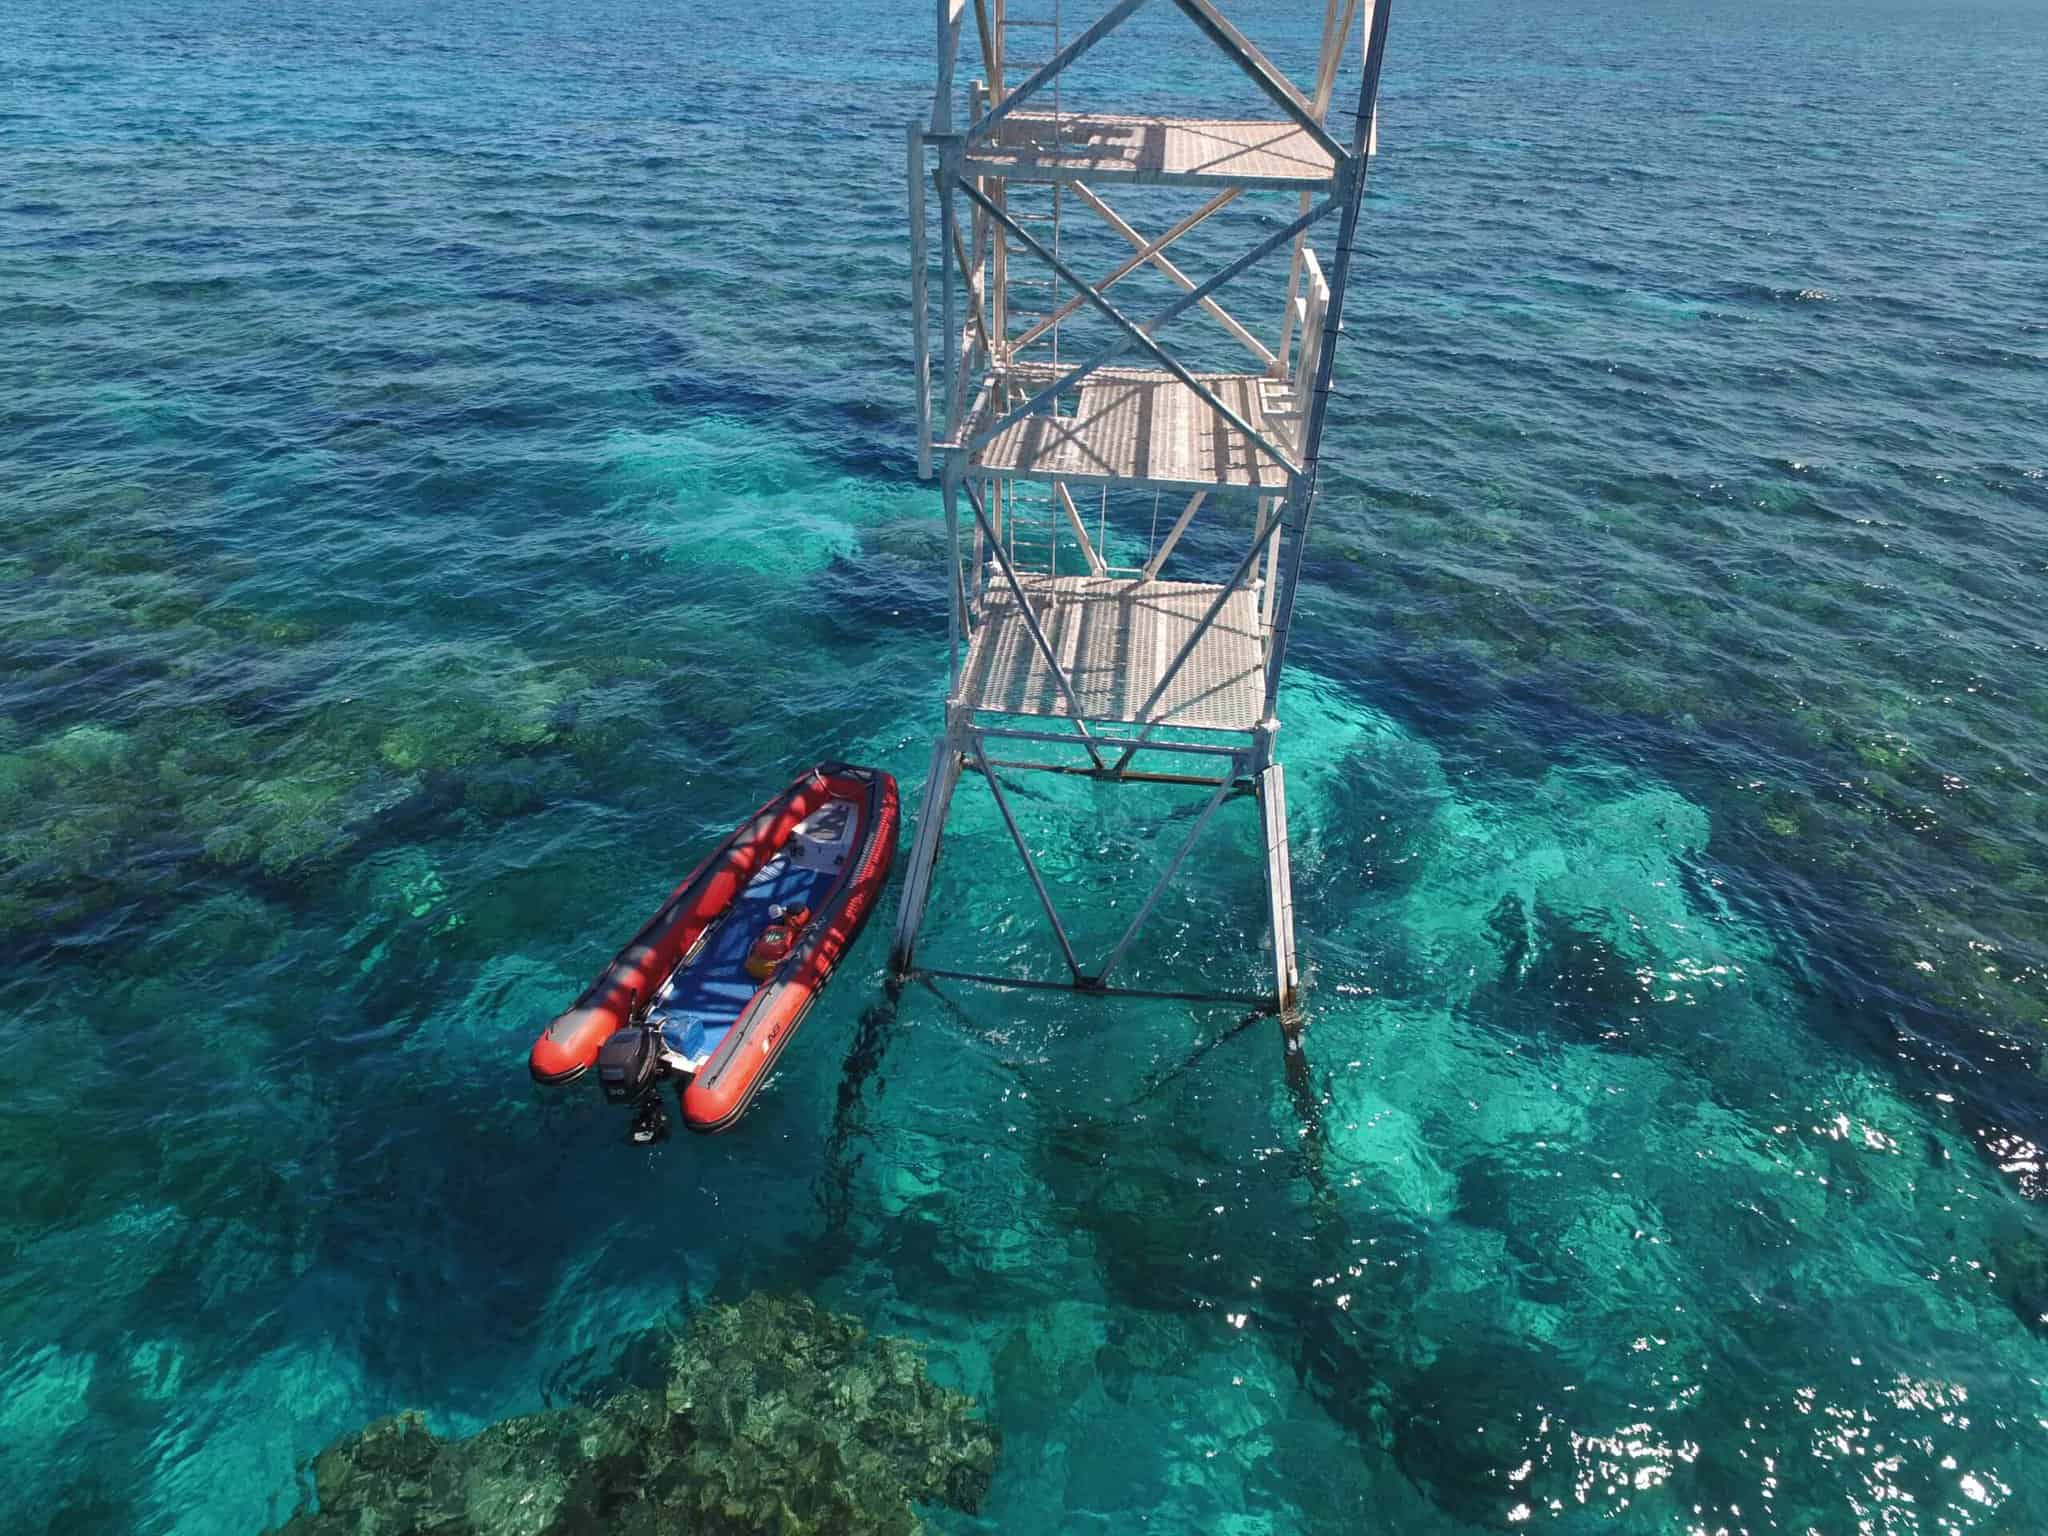 "Protecting the Great Barrier Reef" by Australian Marine Research Institute @ RIBs ONLY - Home of the Rigid Inflatable Home